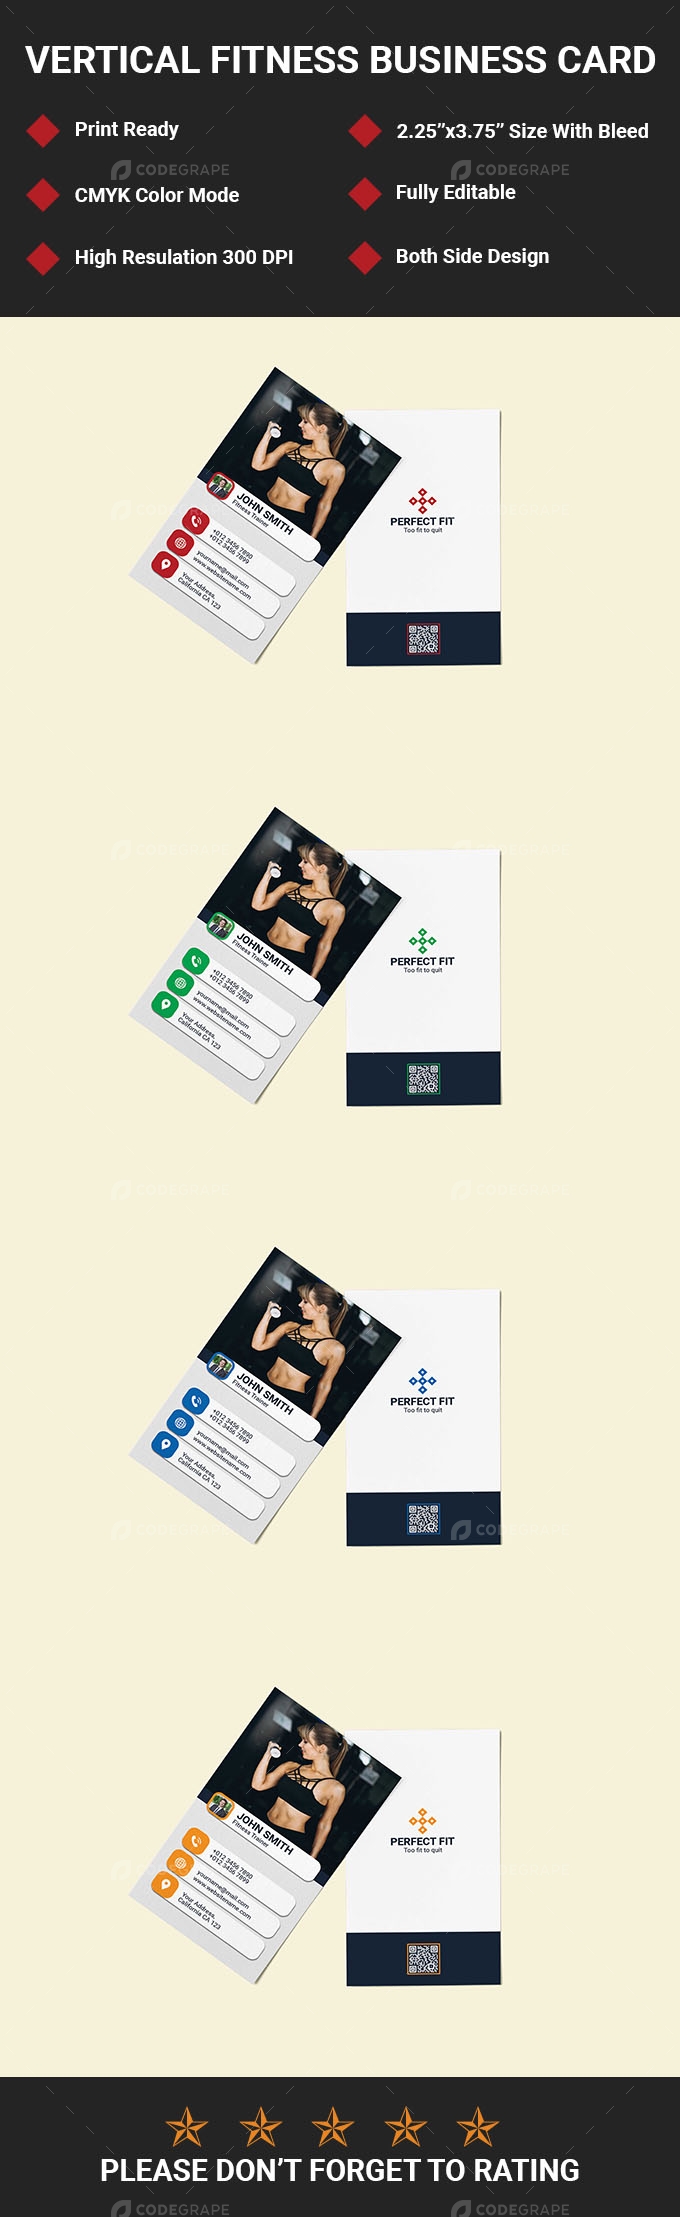 Vertical Fitness Business Card